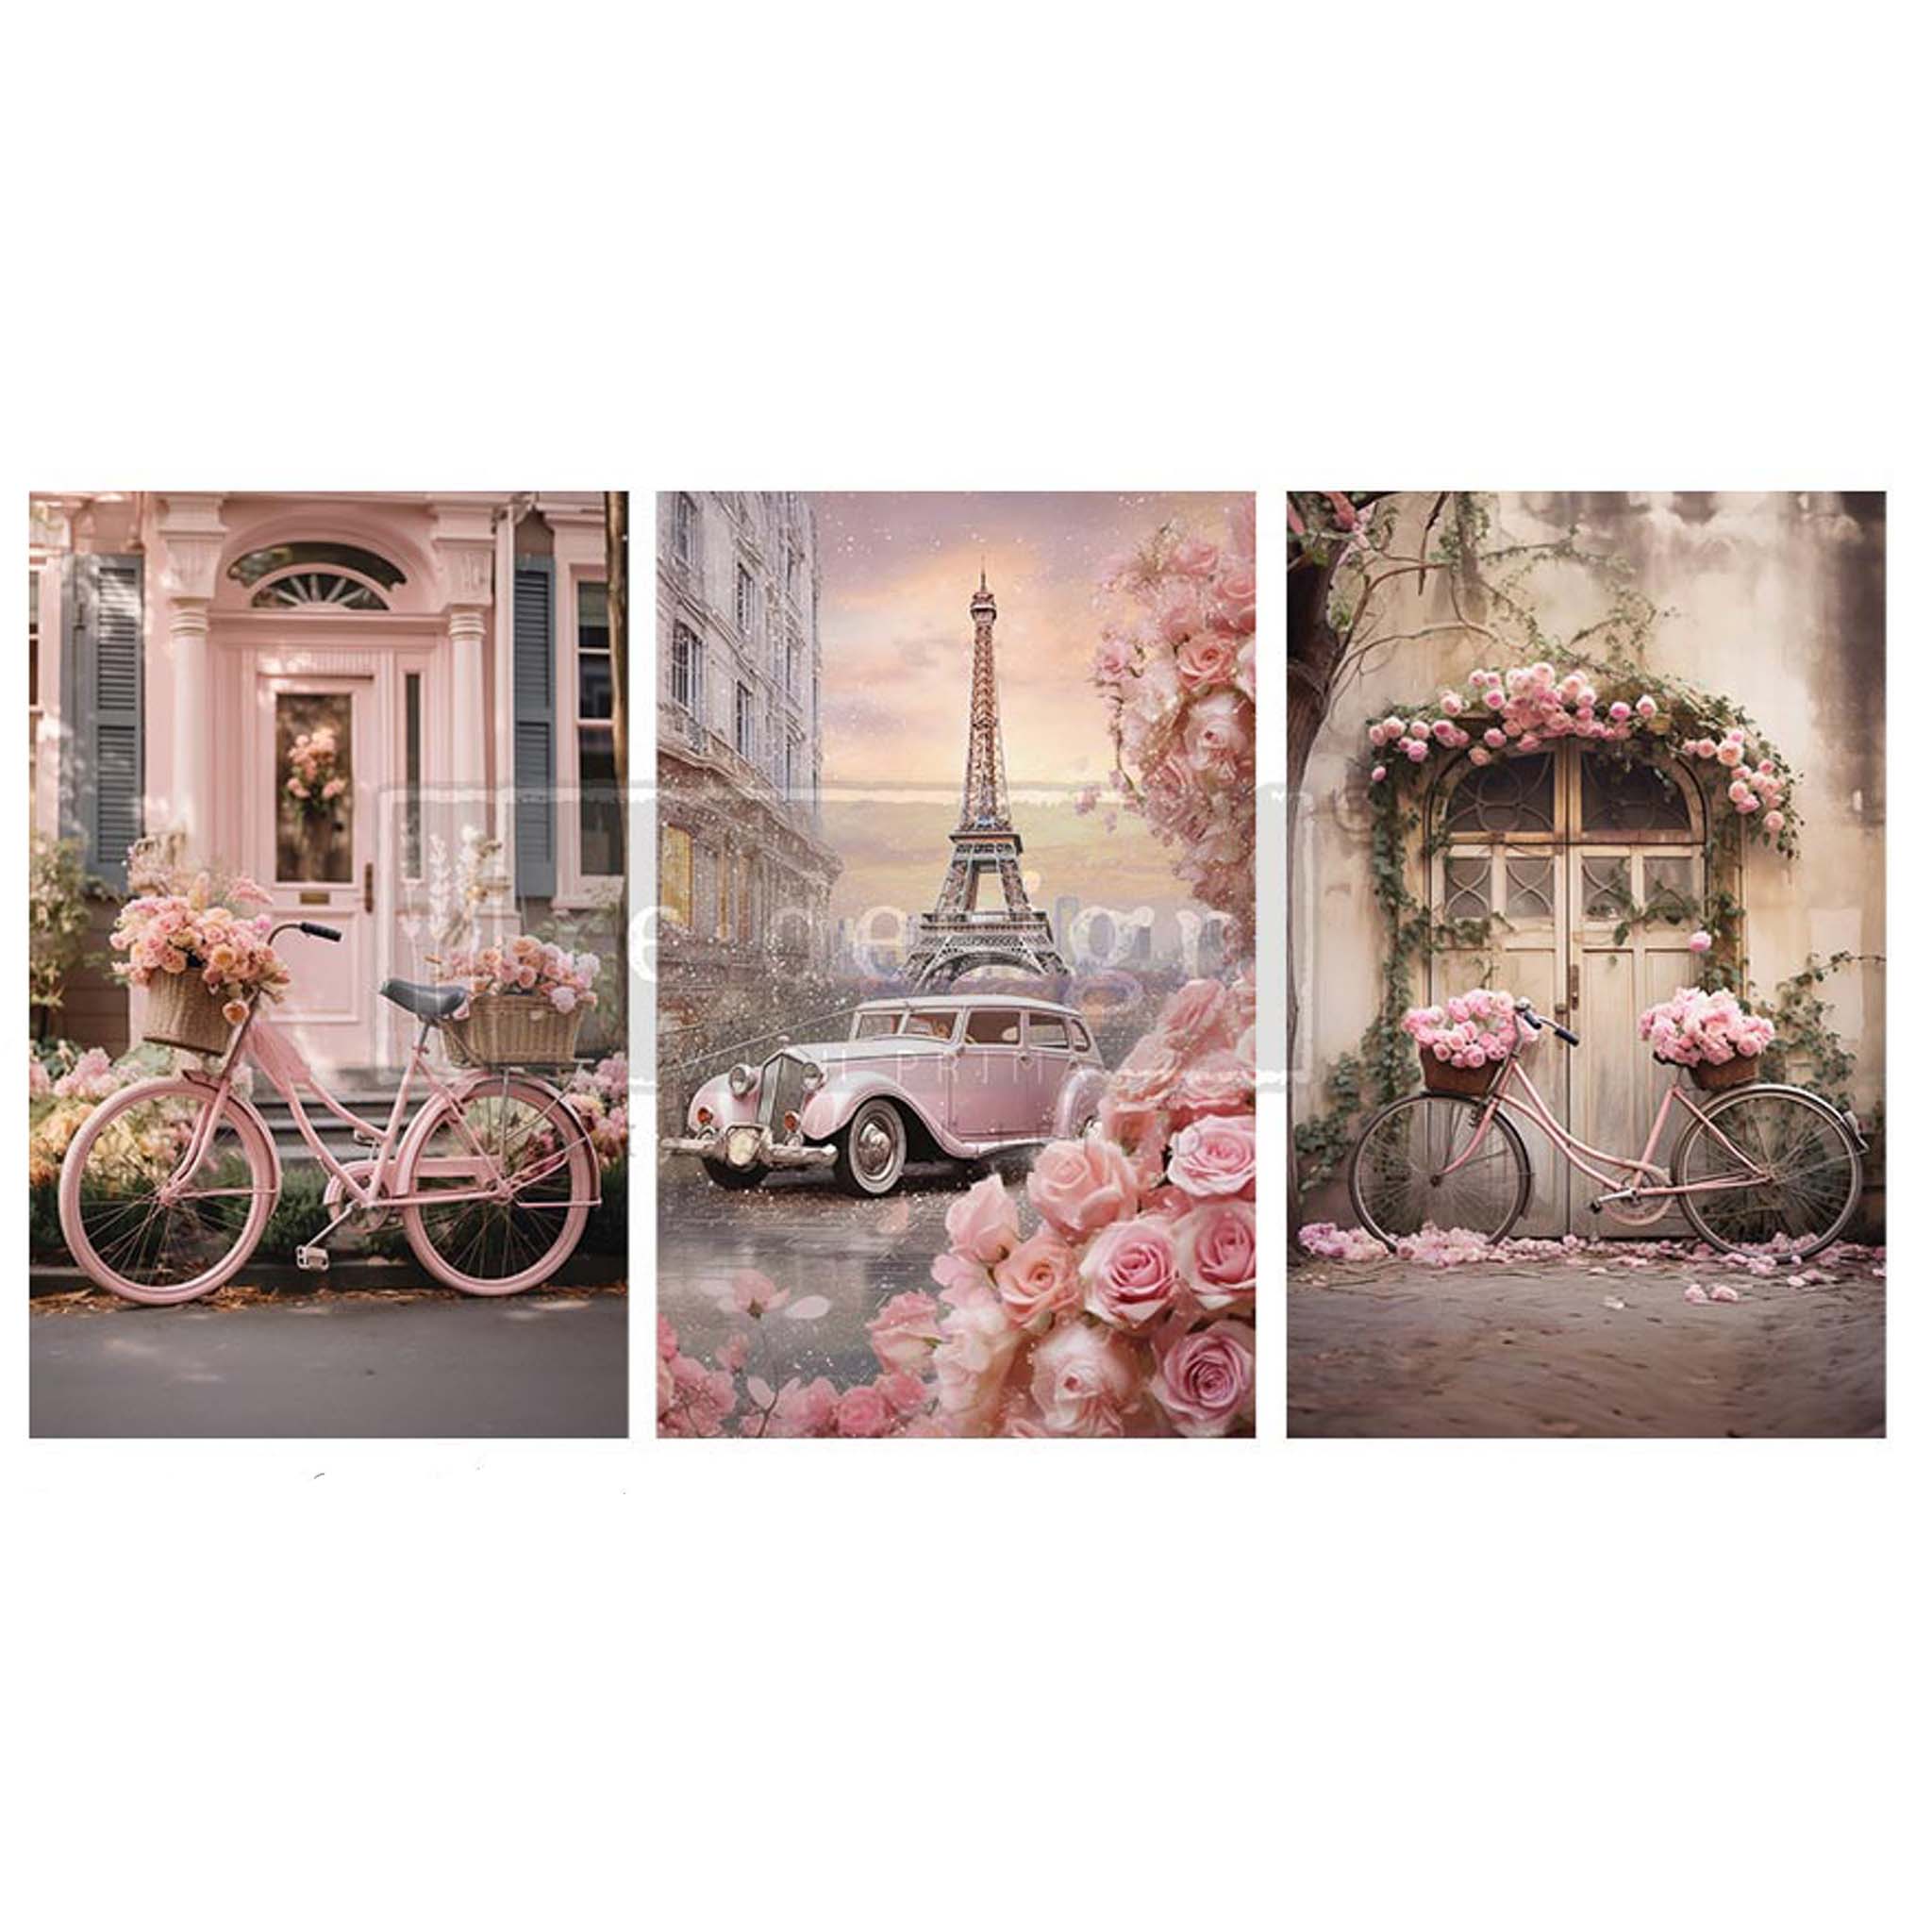 A white background with 3 tissue papers that feature a design with a vintage car in front of the iconic Eiffel Tower and two designs of vintage bicycles in front of Parisian homes, all surrounded by lovely pink roses and flowers.